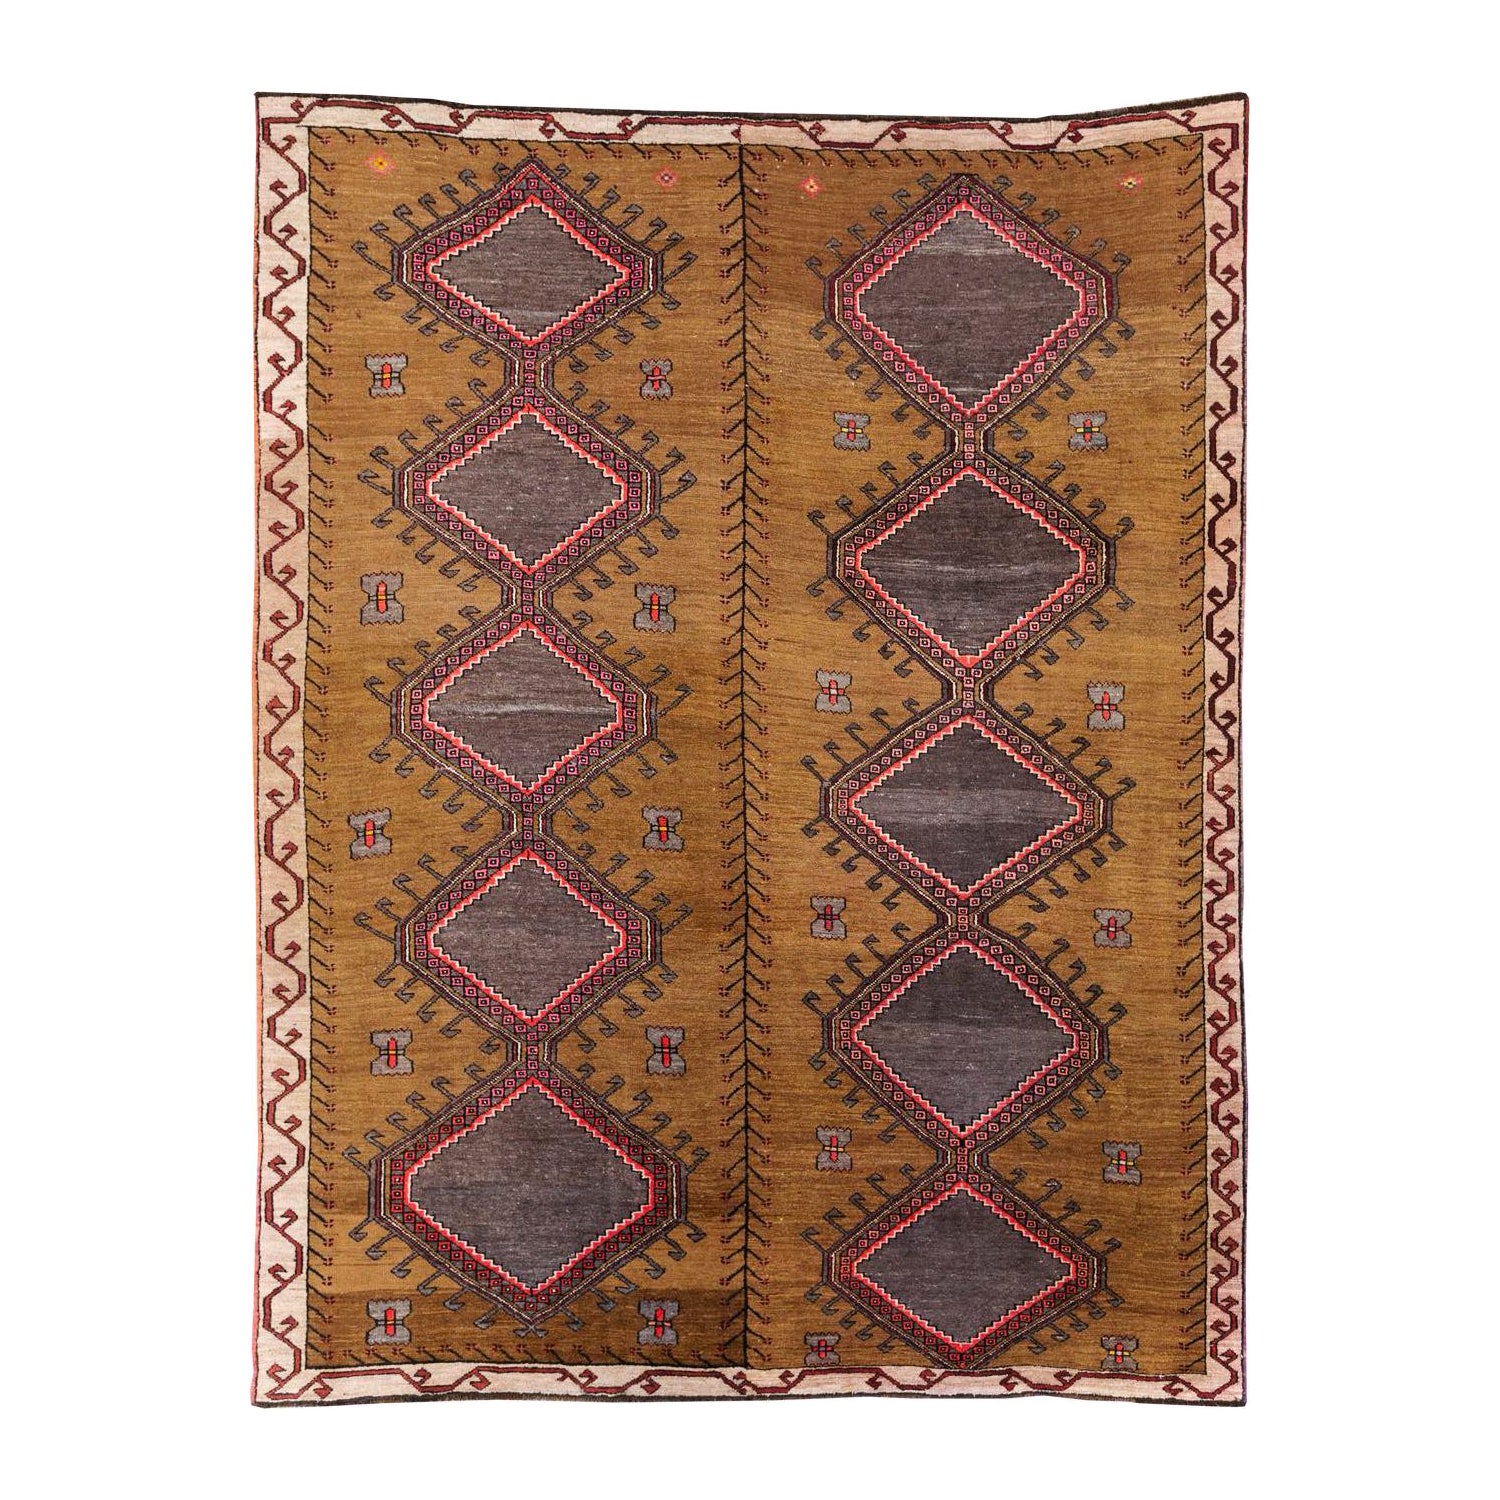 Galerie Shabab Collection Mid-20th Century Turkish Tribal Room Size Carpet